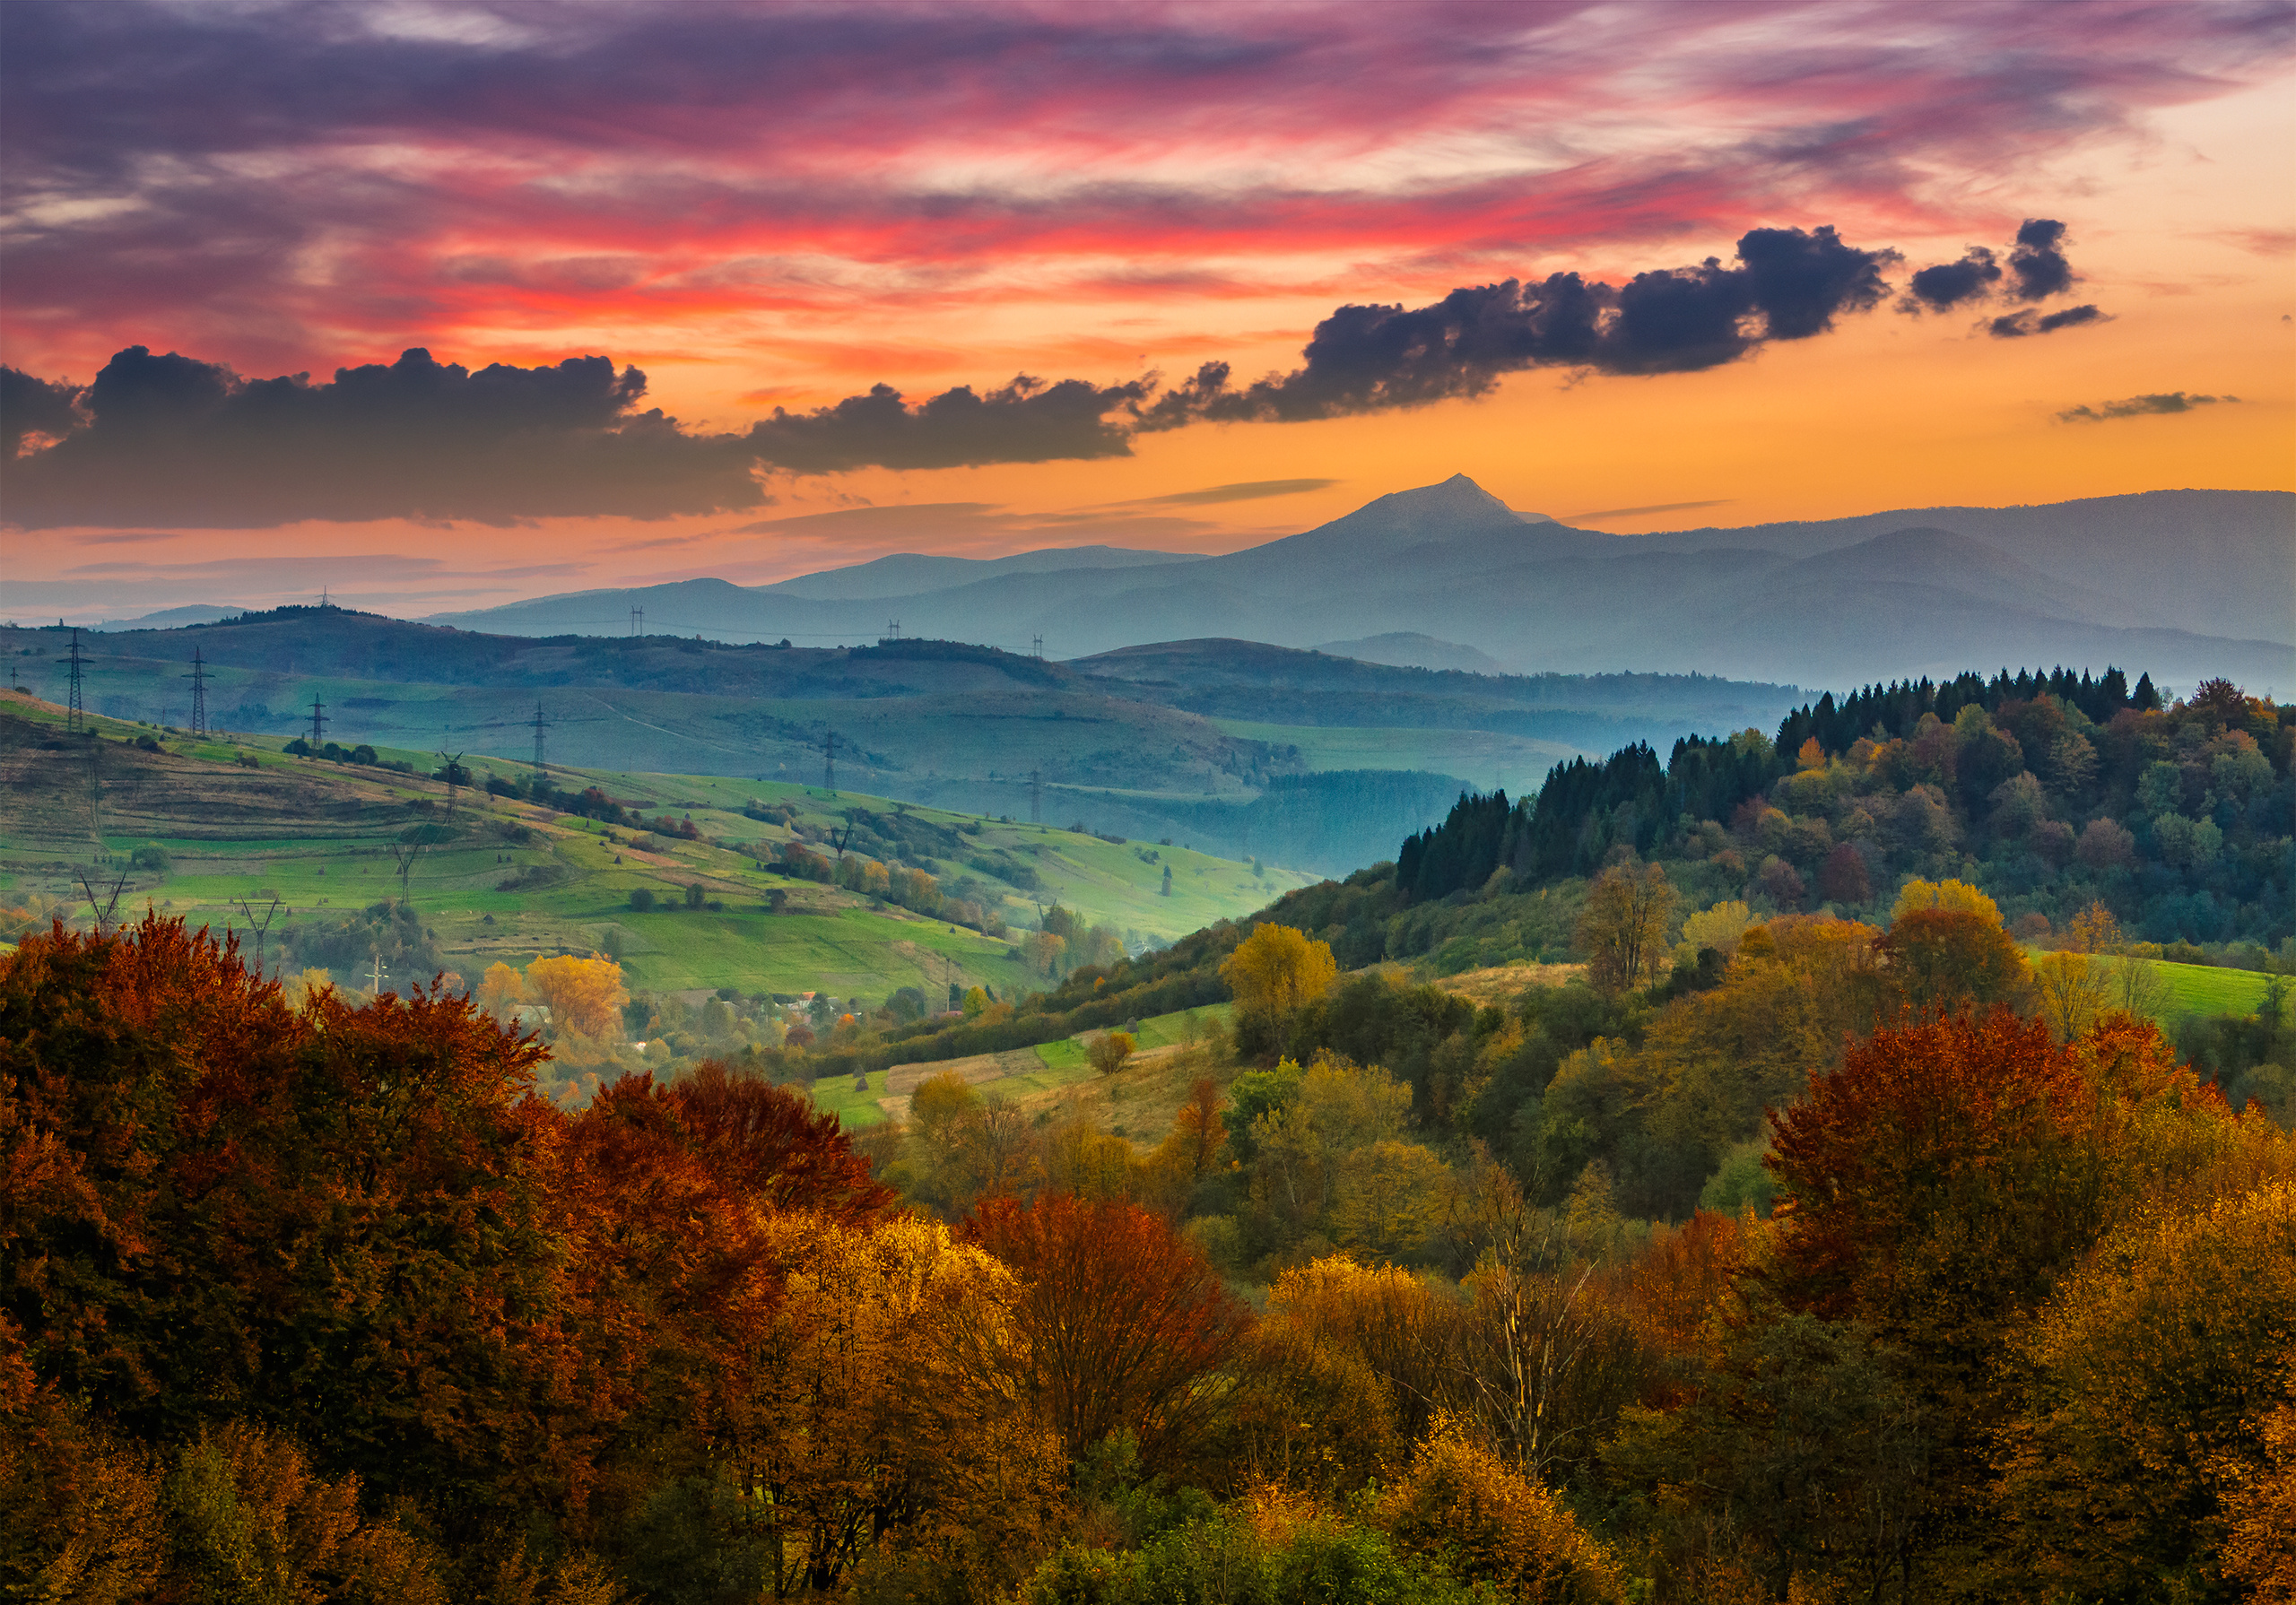 15 Fascinating Facts About Hills - Exploring Nature's Majestic Landforms 